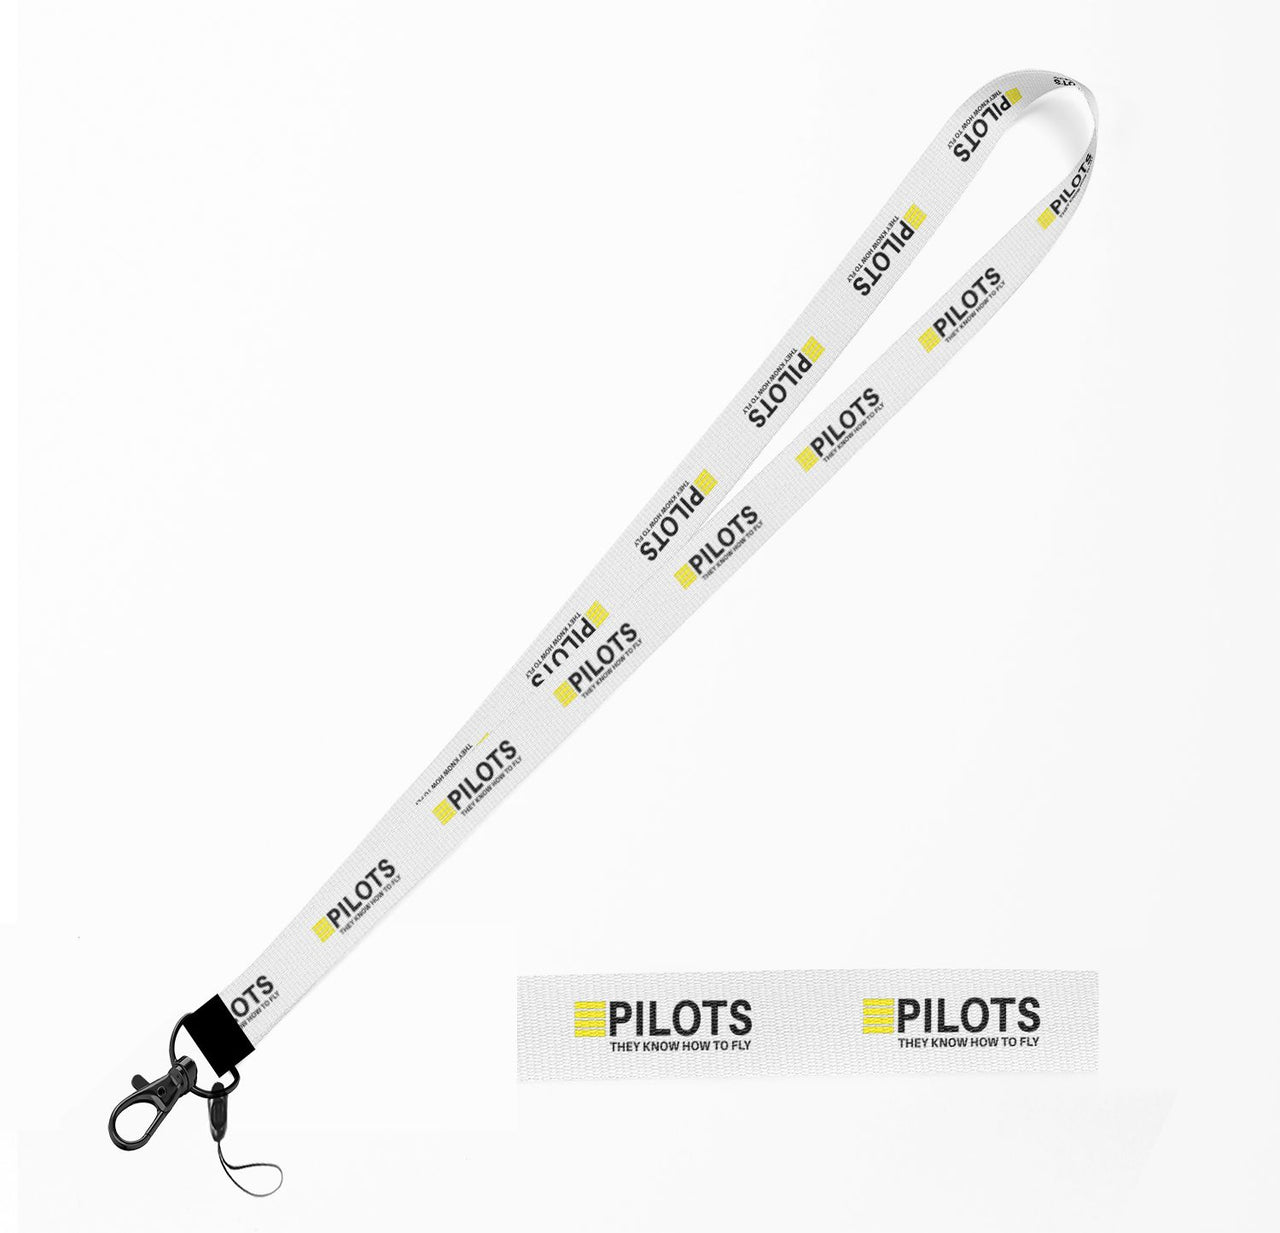 Pilots They Know How To Fly Designed Lanyard & ID Holders